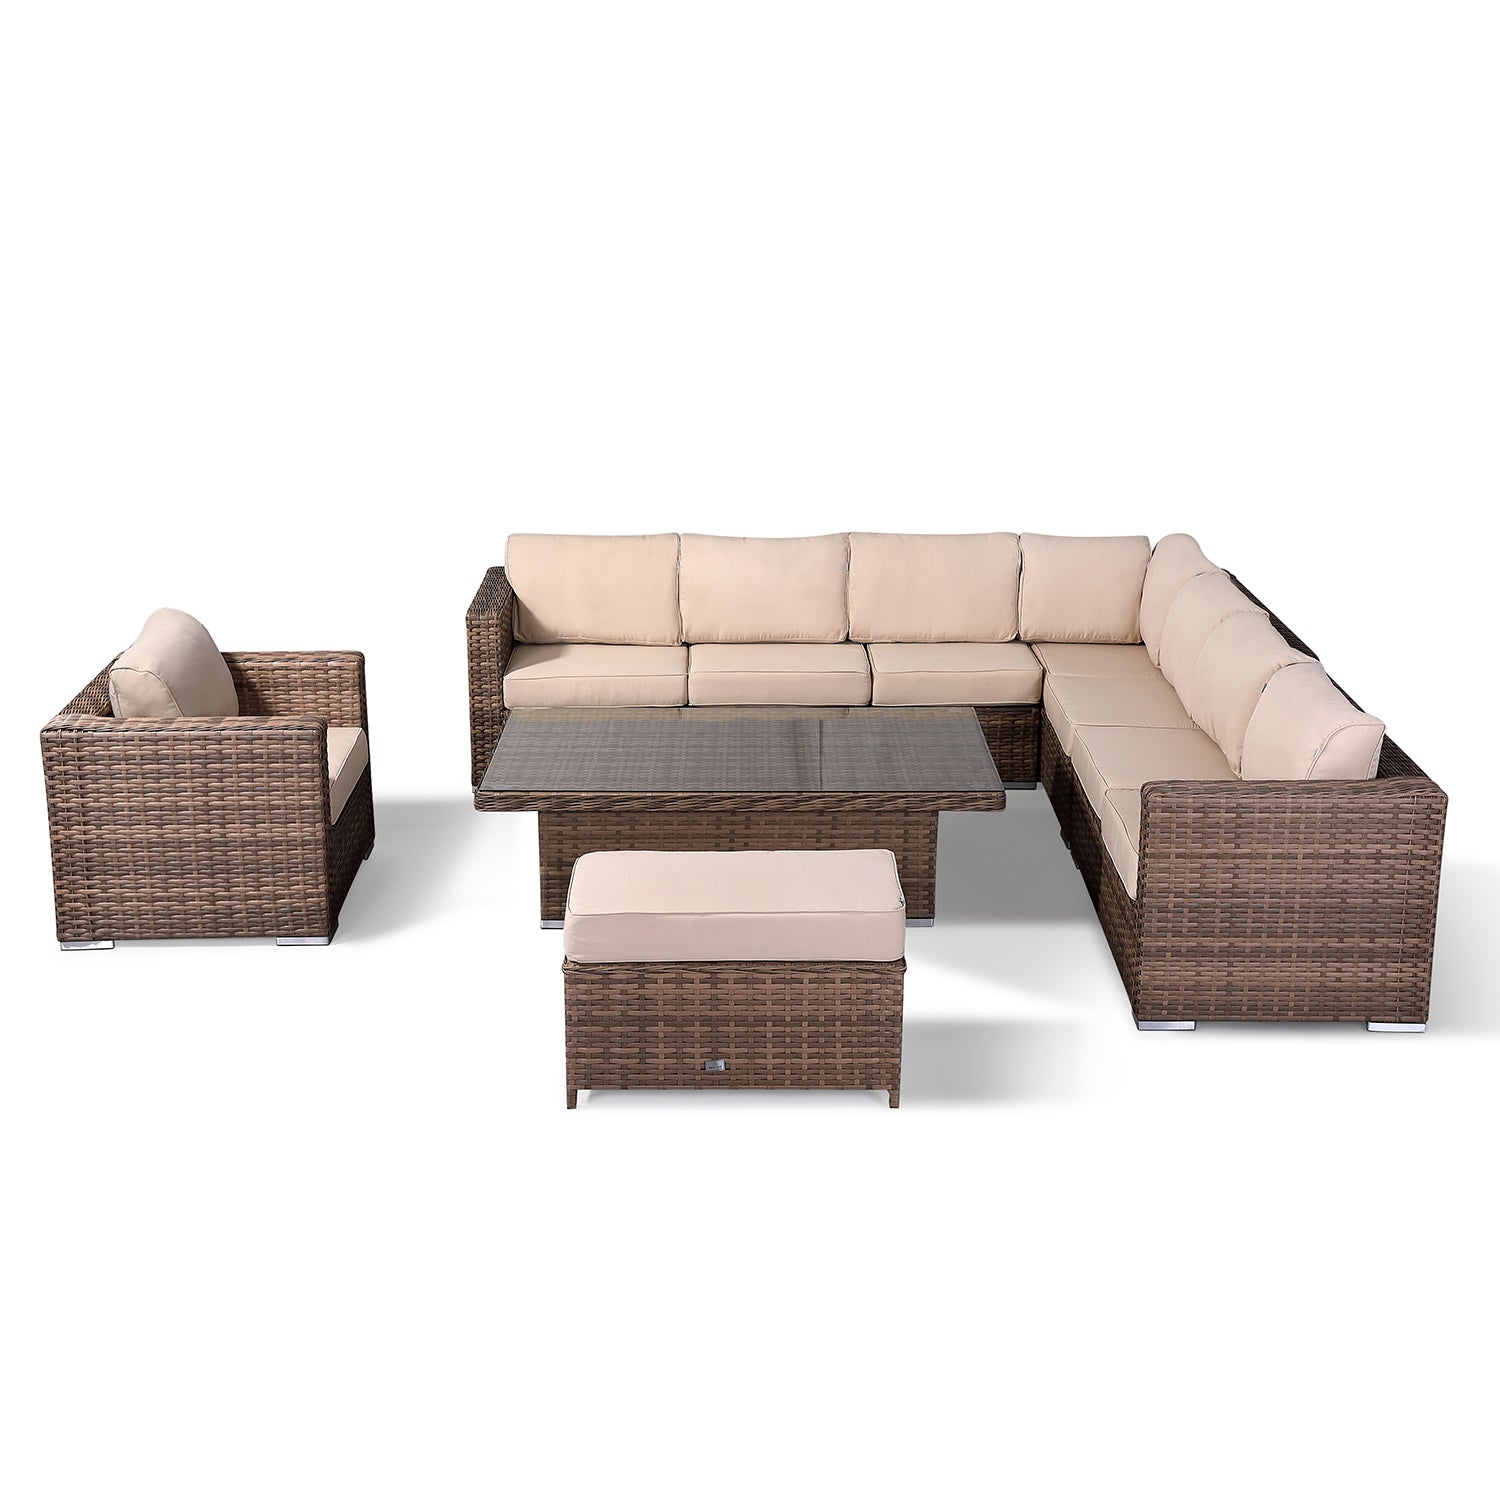 Durley Elite Modular Corner Sofa Set with Rising Table in Brown weave (#217)